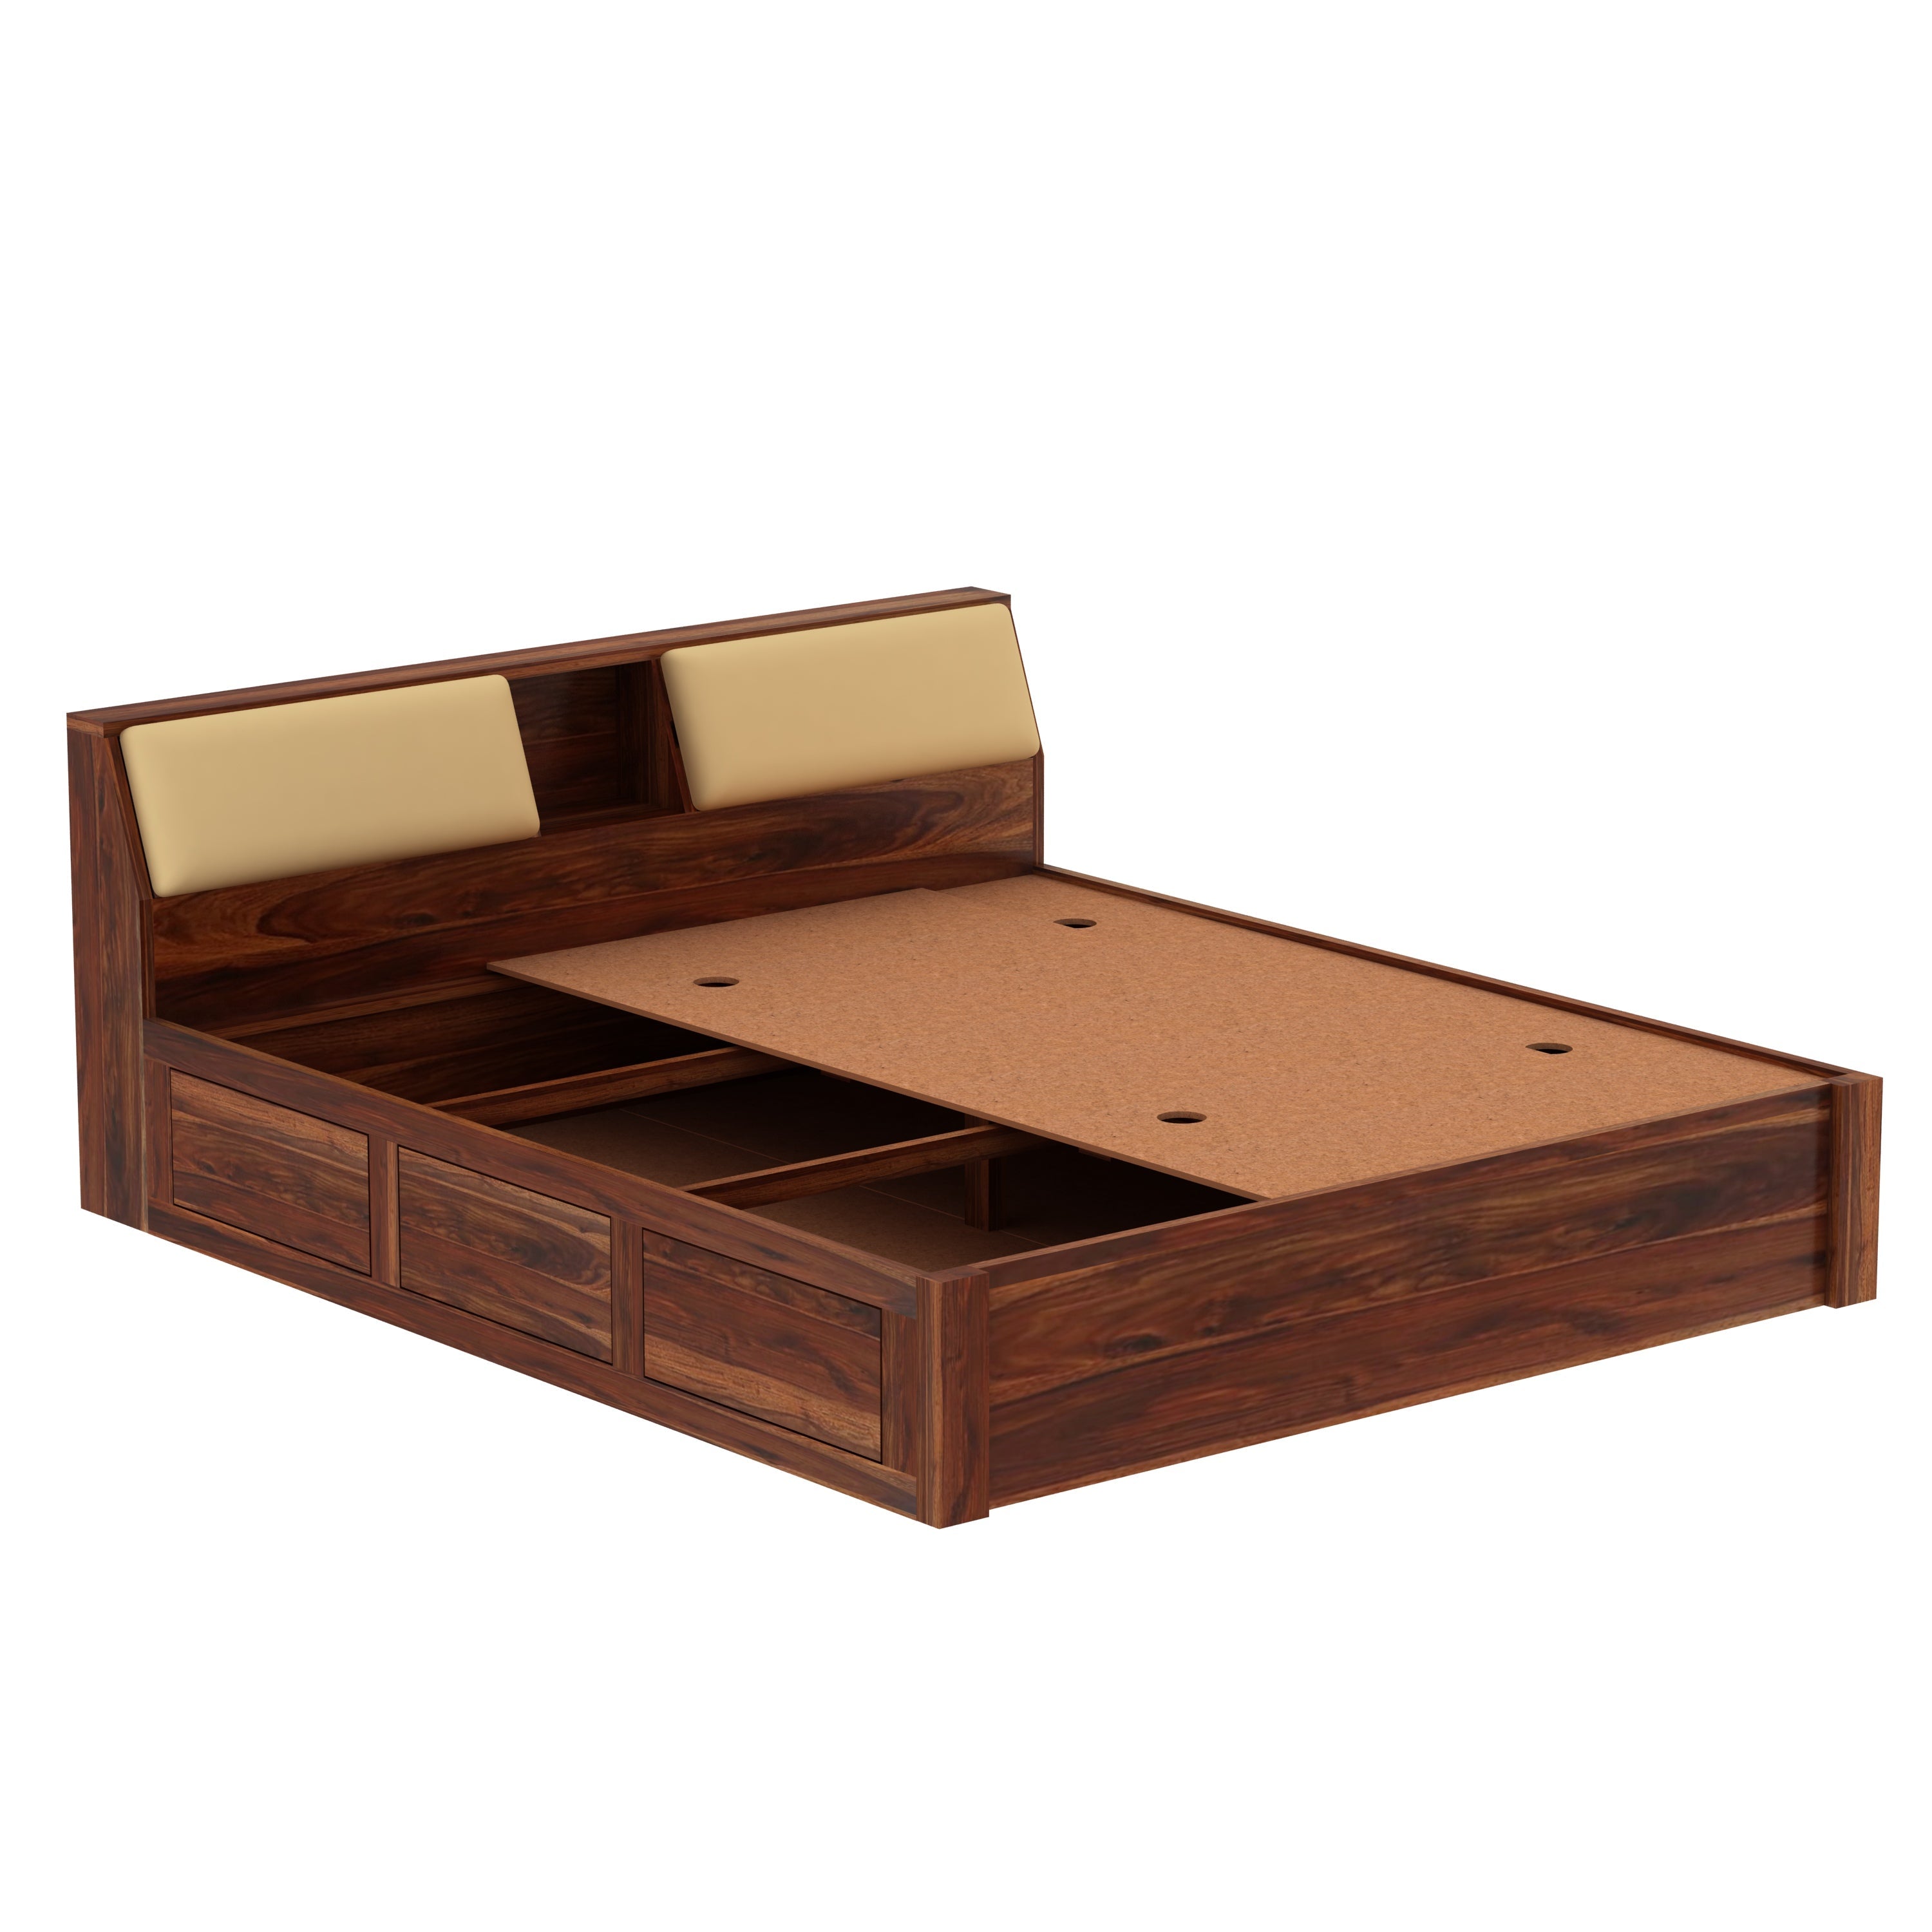 Rubikk Solid Sheesham Wood Bed With Box Storage (Queen Size, Natural Finish)